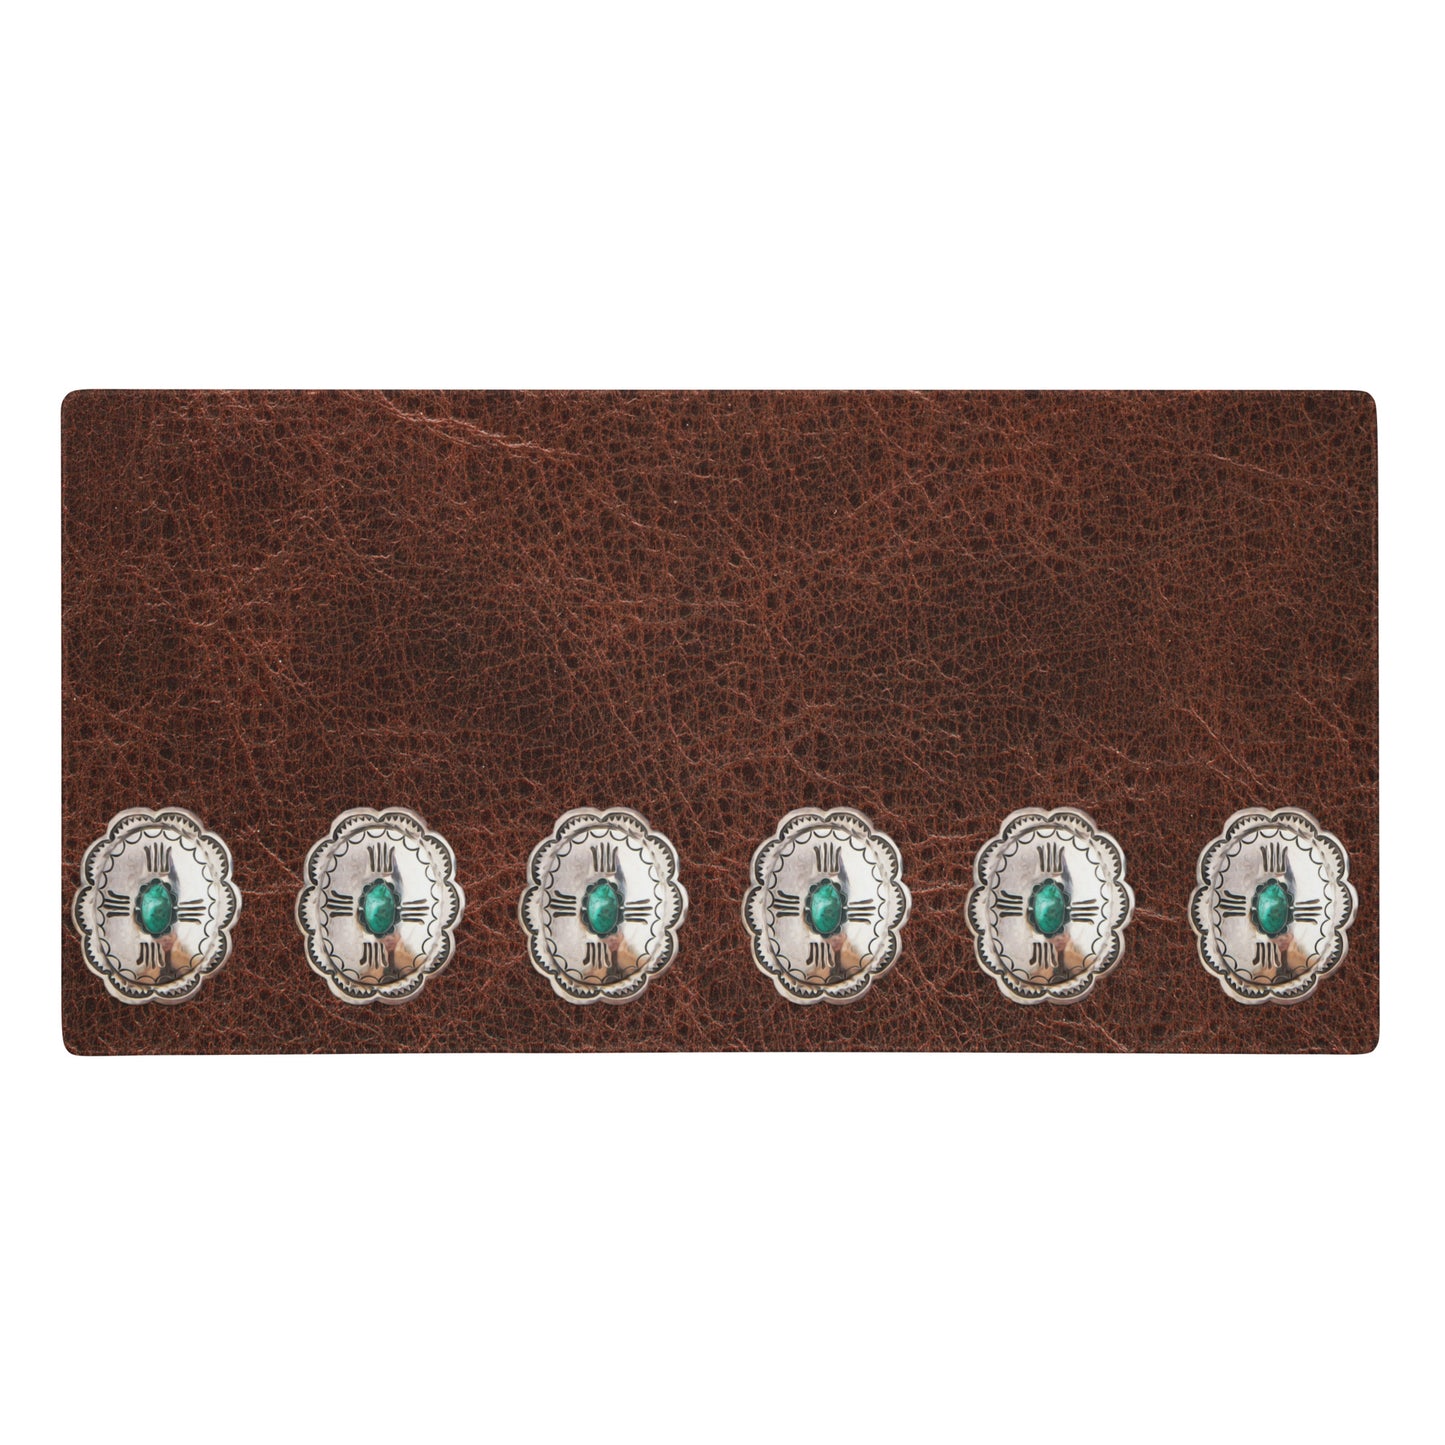 Leather Print & Concho Gaming mouse pad - concho, gaming, home office, leather, leather print, office, office accessories, pc games, pc gaming, work from home -  - Baha Ranch Western Wear